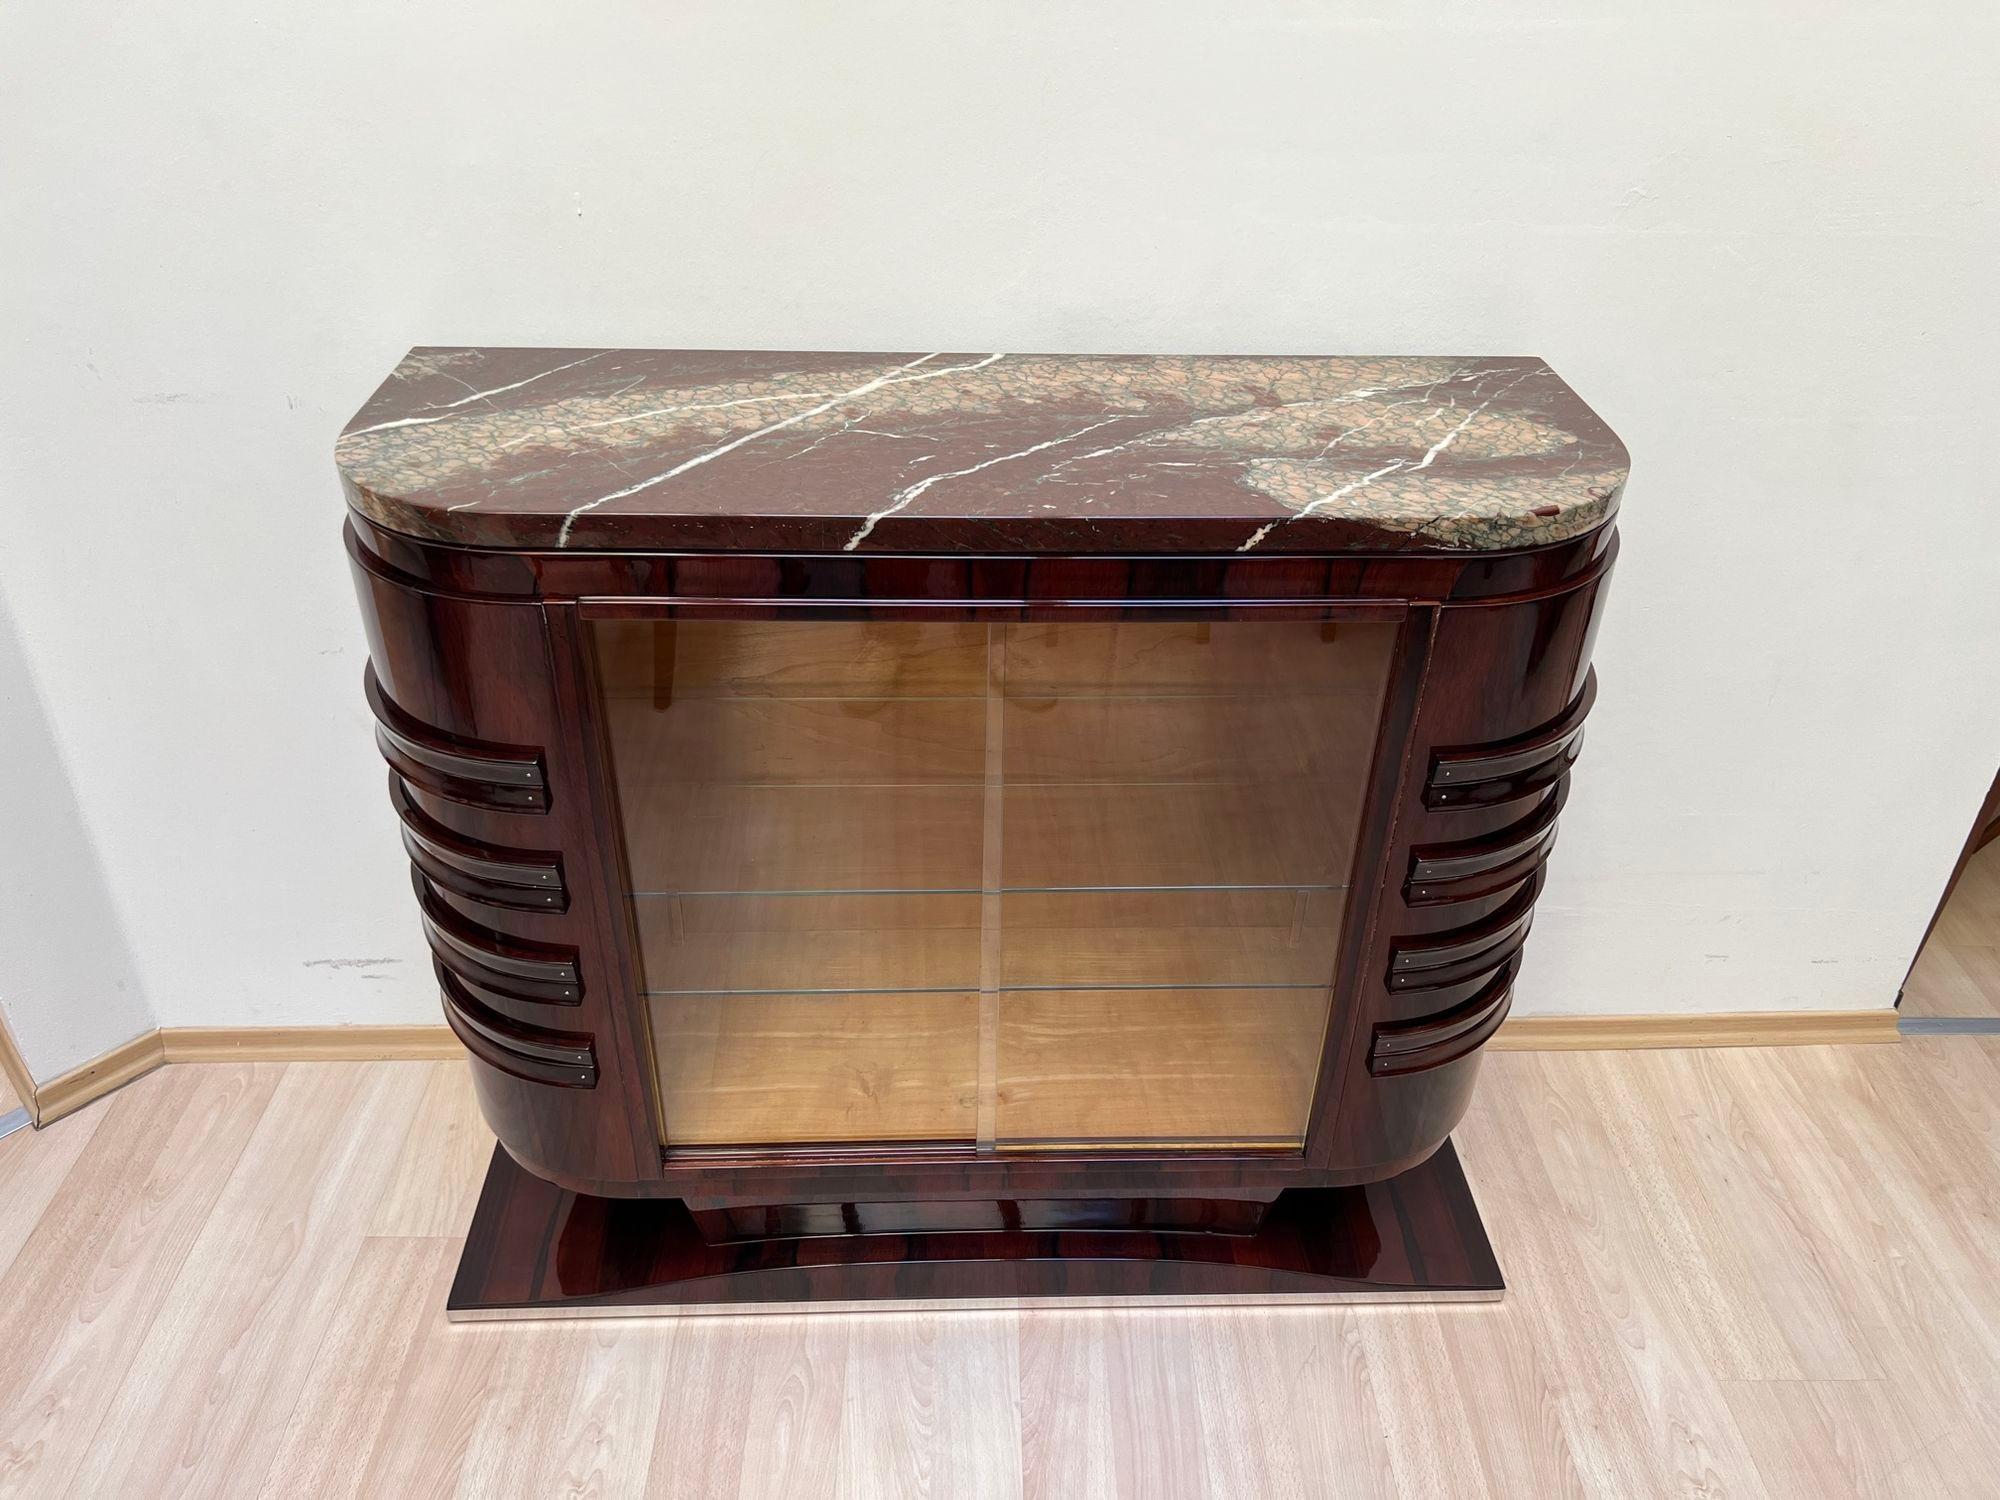 Elegant original, Art Deco vitrine, showcase or sideboard in lacquered rosewood veneer from France around 1930.
Top with stunning thick original marble slab in red-grey-green structure, polished to high-gloss. Elegantly curved base, veneered in